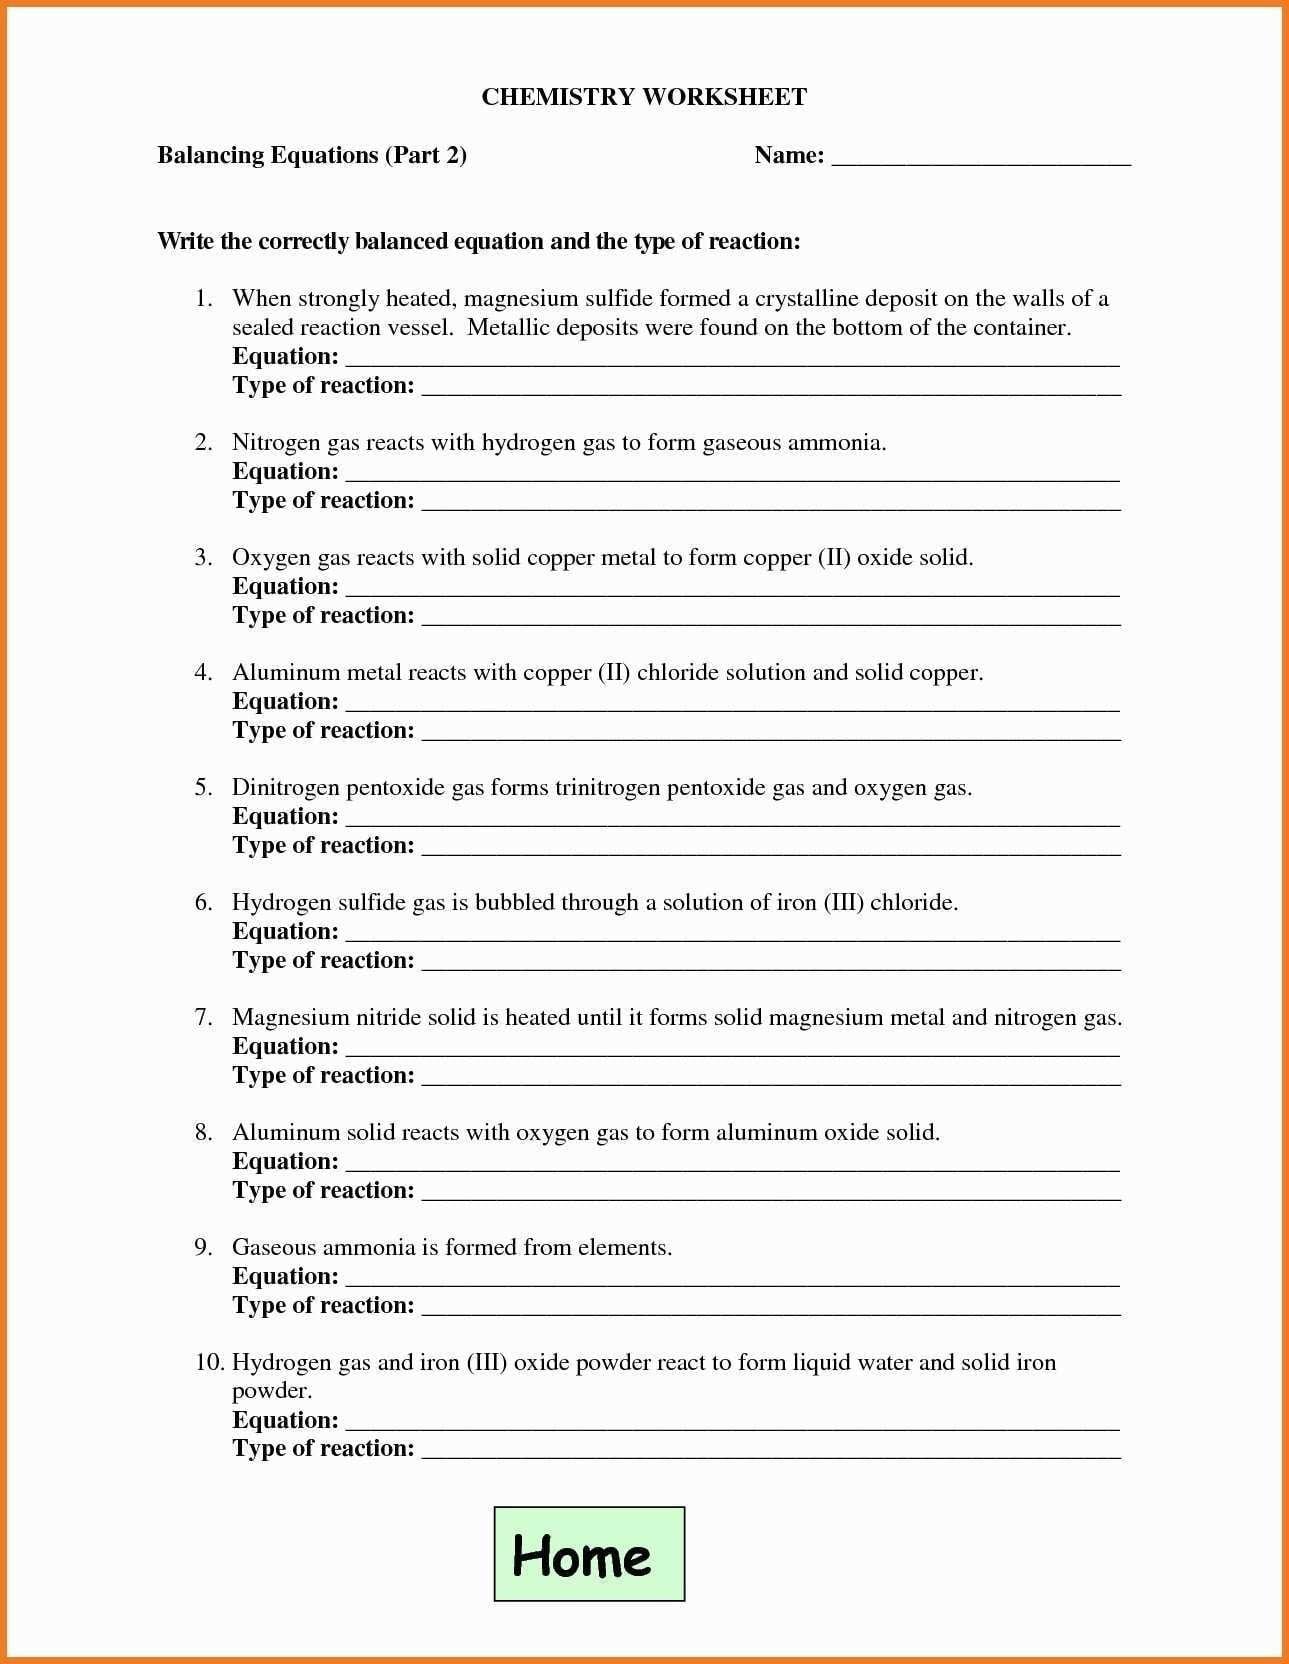 Nuclear Fission And Fusion Worksheet Answers  Briefencounters With Regard To Nuclear Fission And Fusion Worksheet Answers